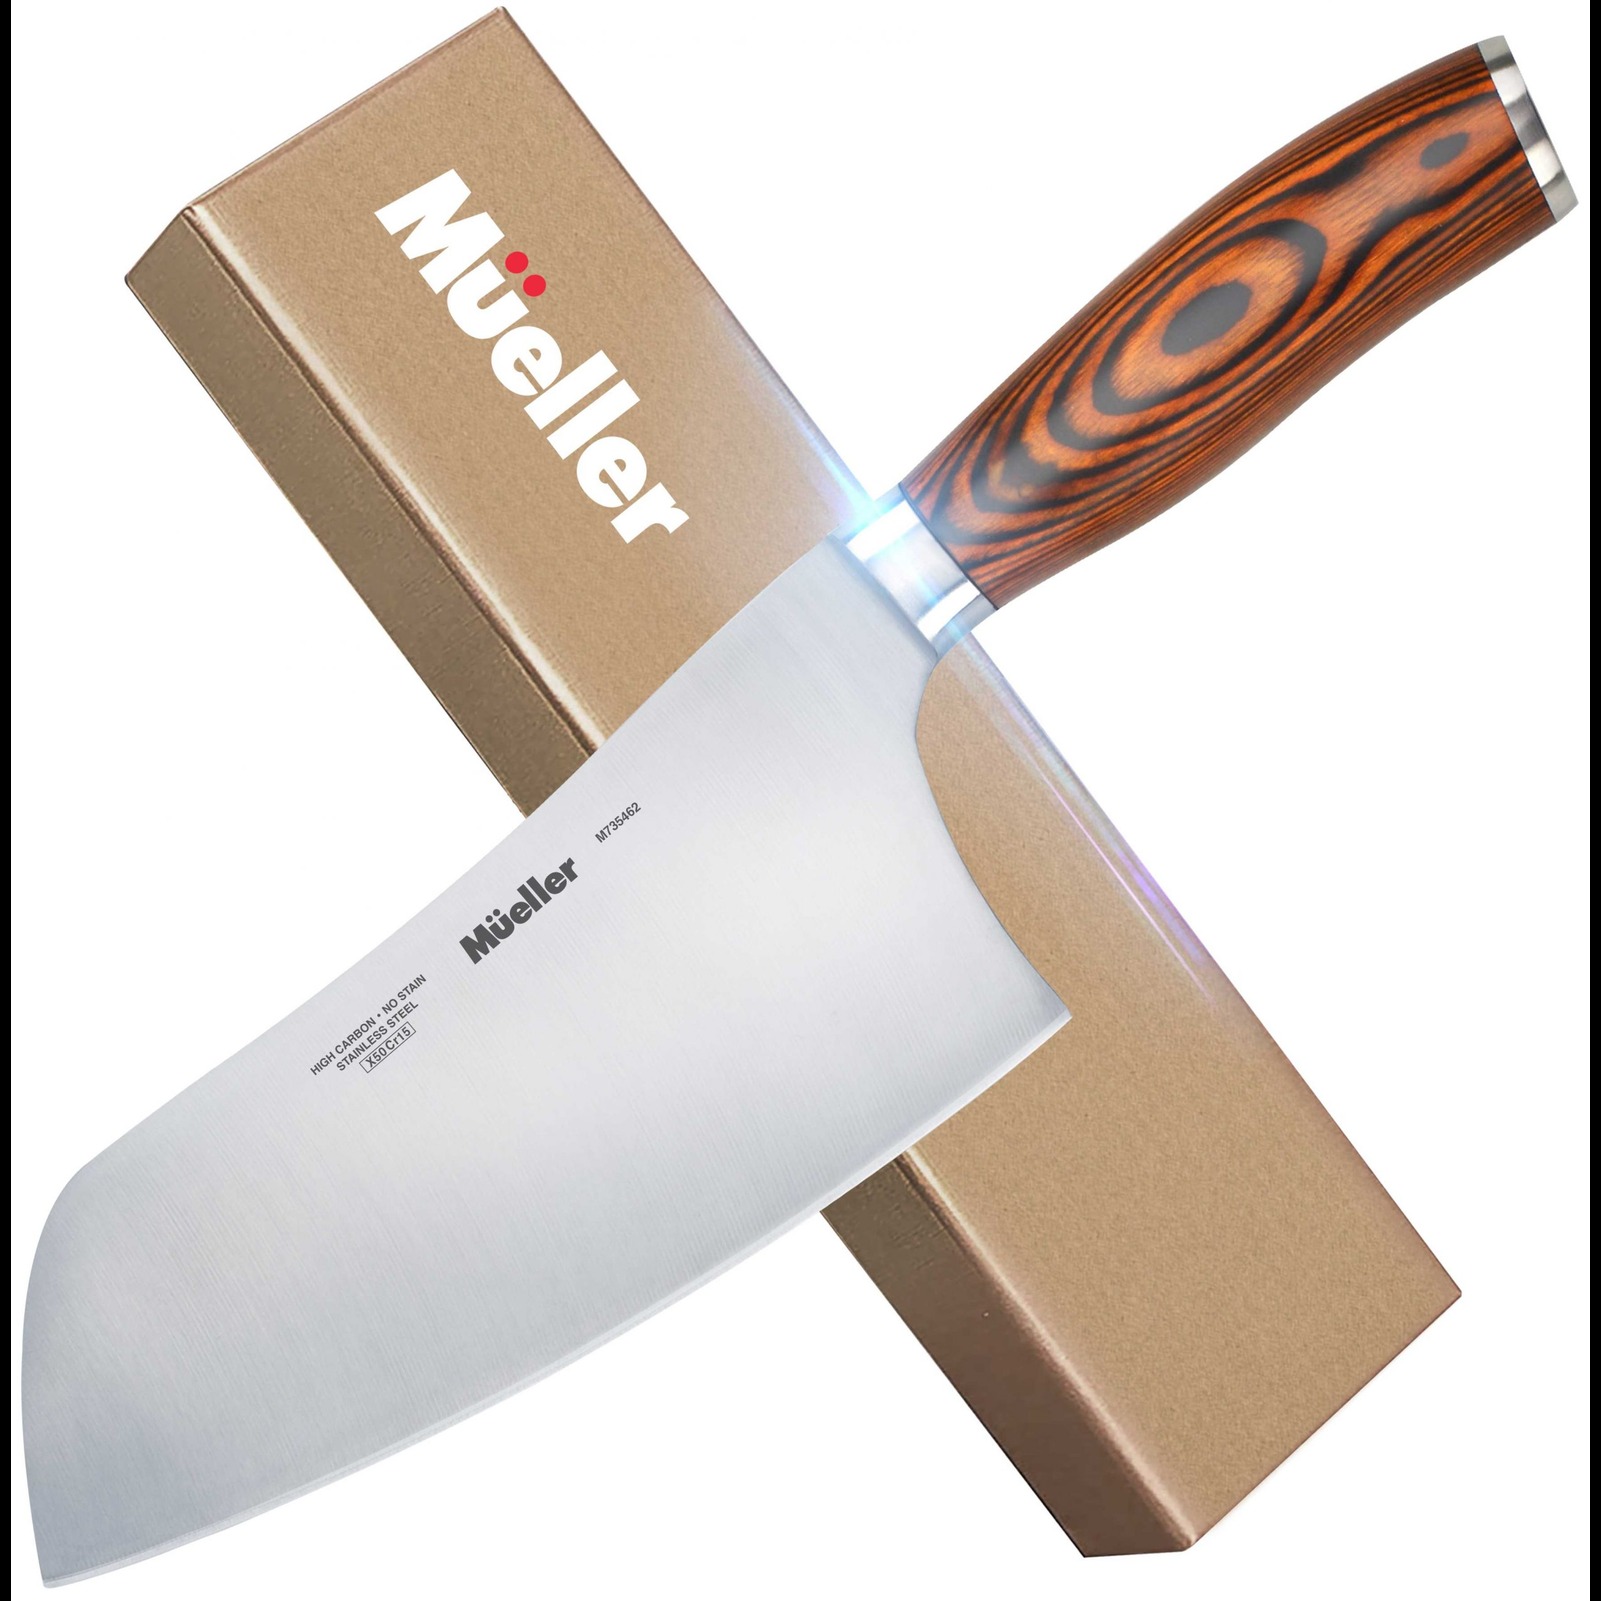 muellerhome_7-inch-Stainless-Steel-Meat-Cleaver-Knife-with-Ergonomic-Pakkawood-Handle-scaled